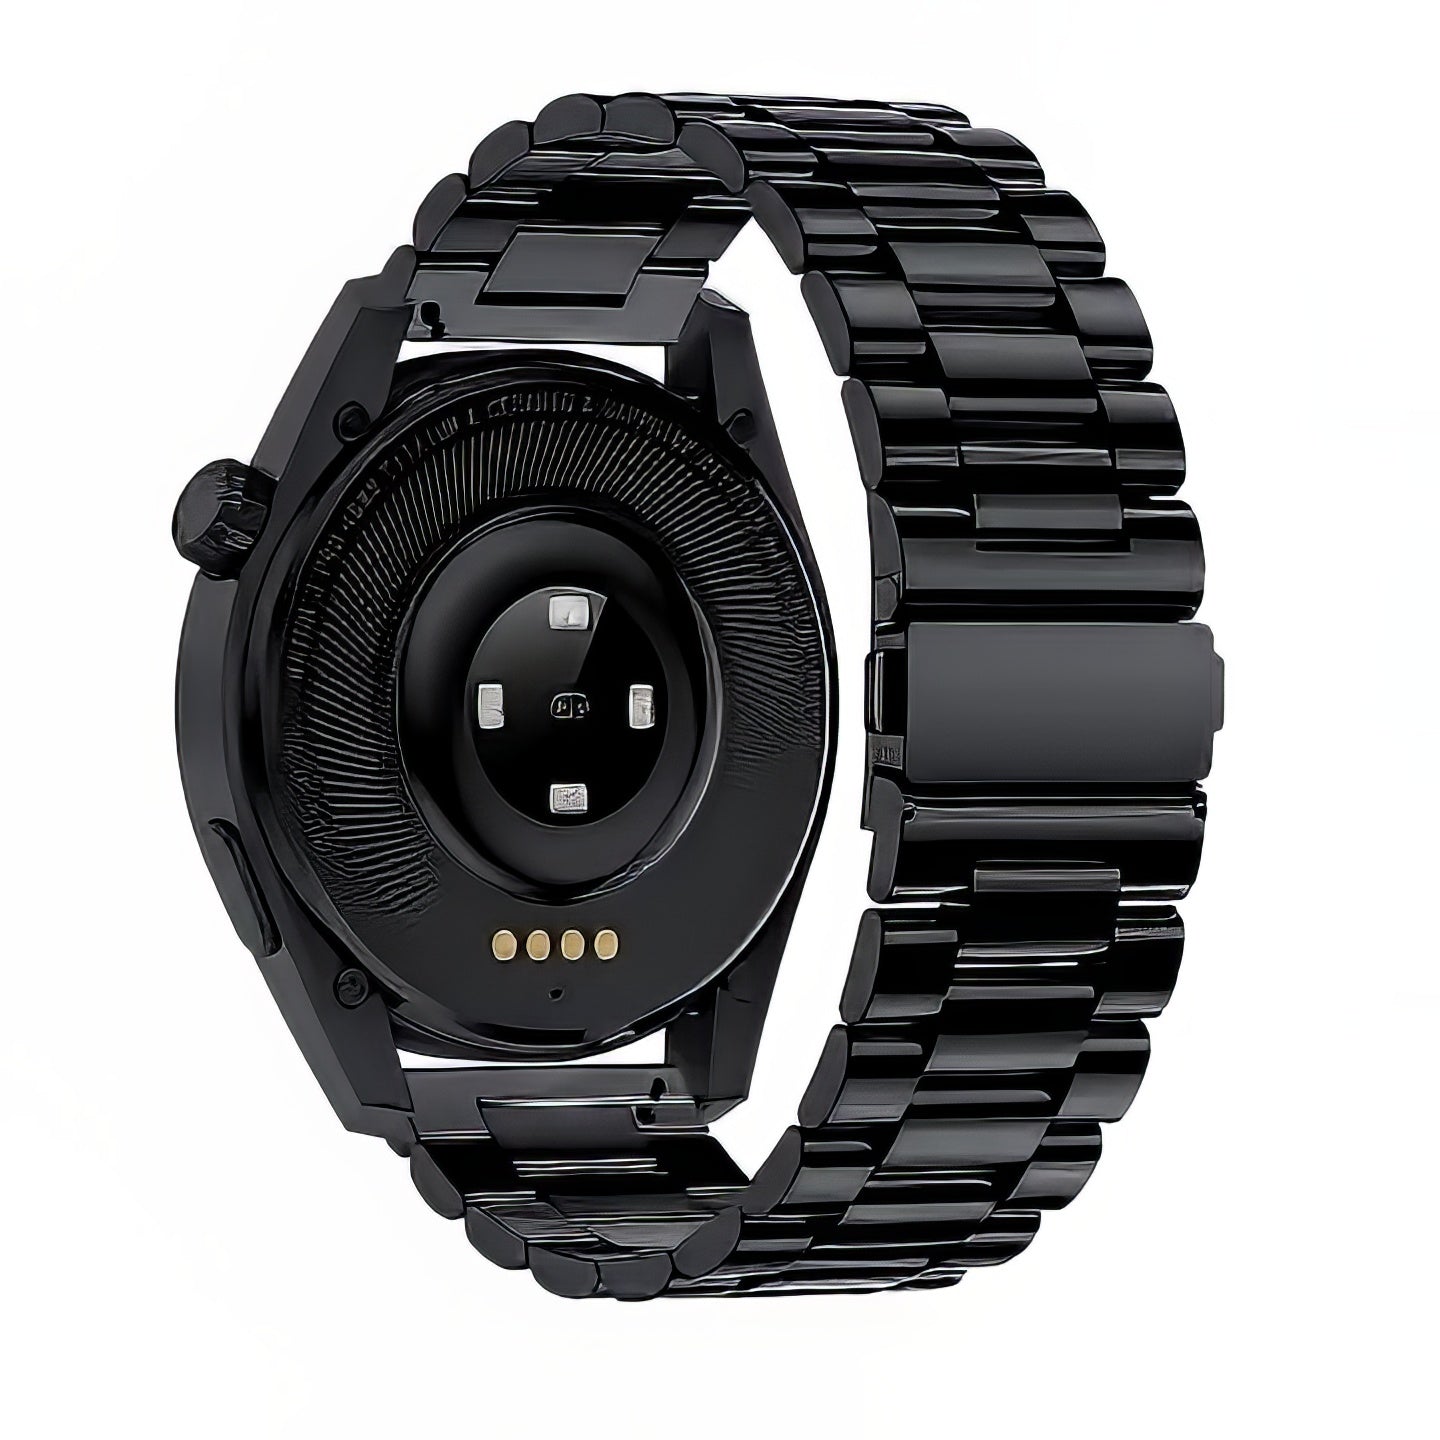 HK3 Pro Smart Watch: Private Model with Heart Rate Monitor &amp; IP68 Waterproofing